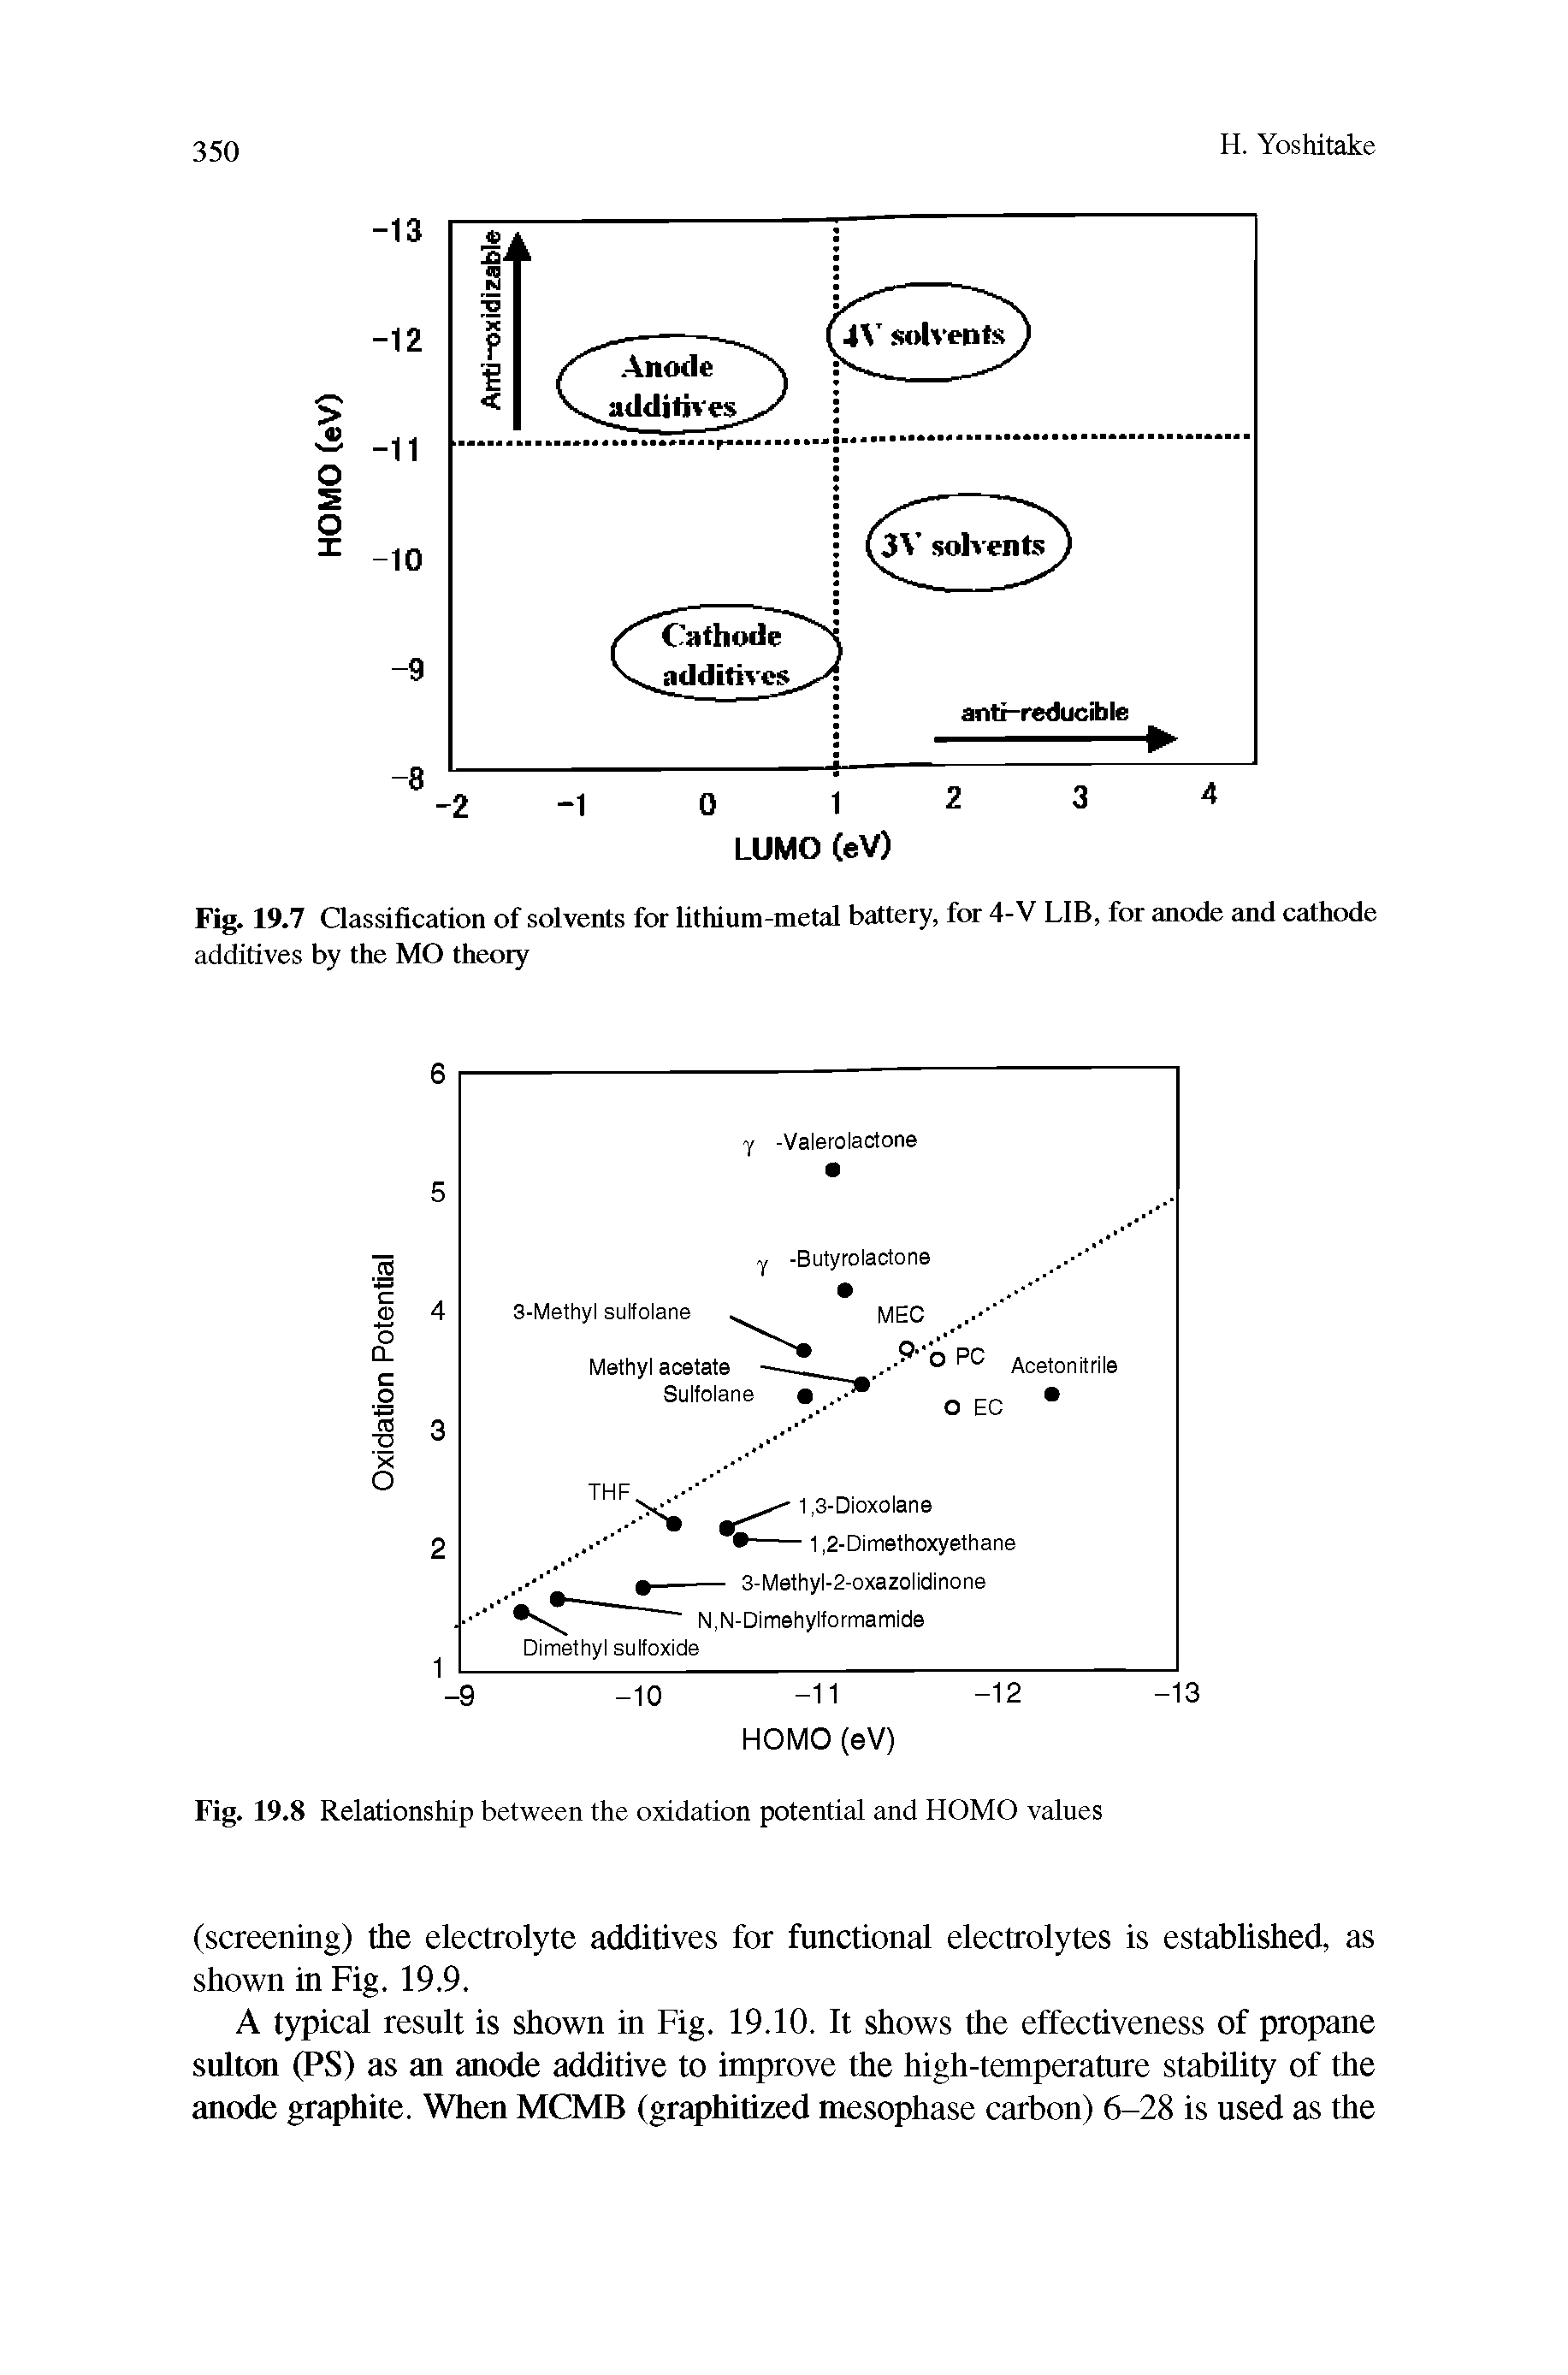 Fig. 19.7 Classification of solvents for lithium-metal battery, for 4-V LIB, for anode and cathode additives by the MO theory...